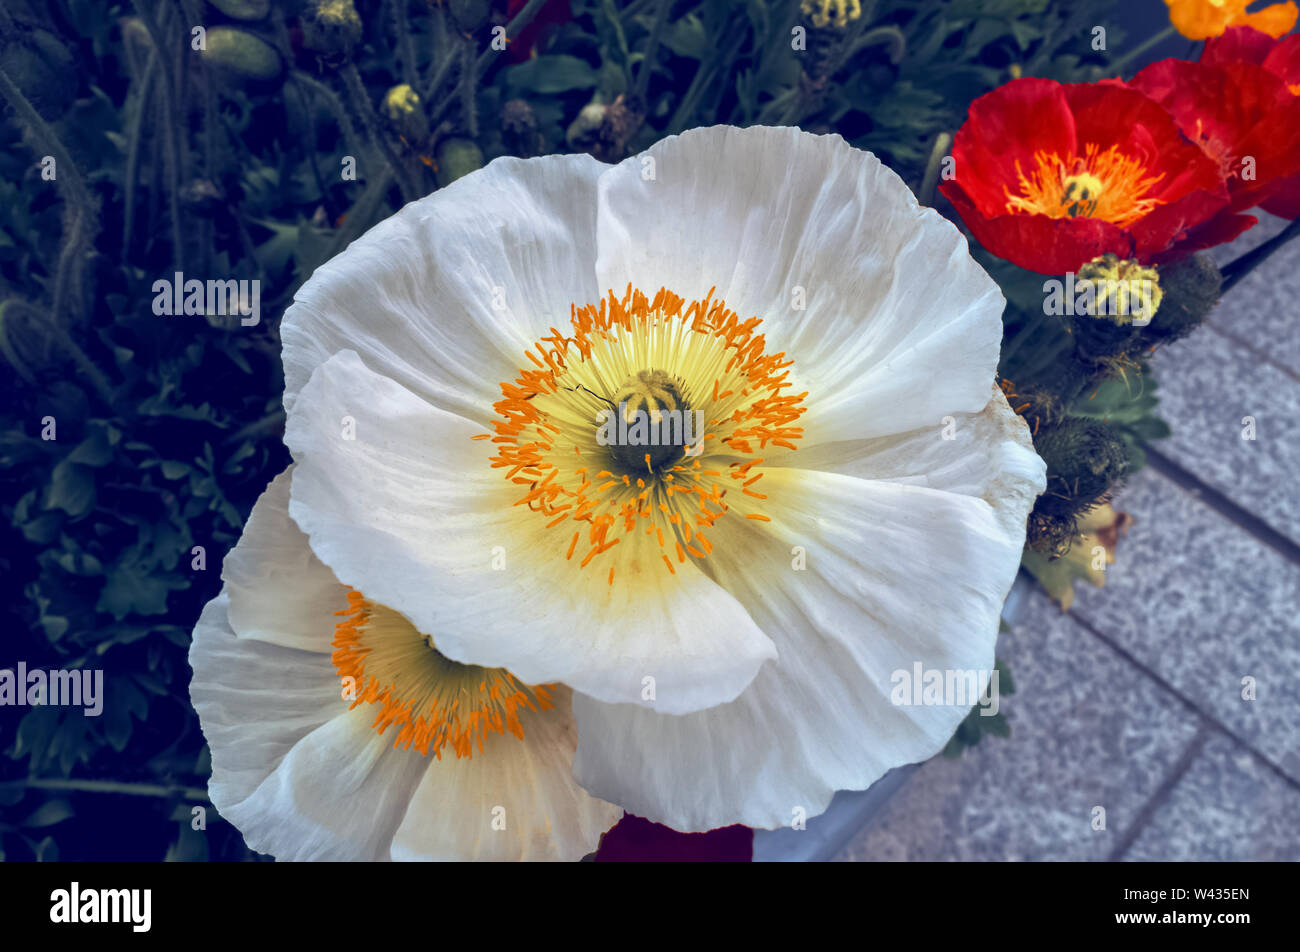 close up view of white cultivated iceland poppies outddor Stock Photo